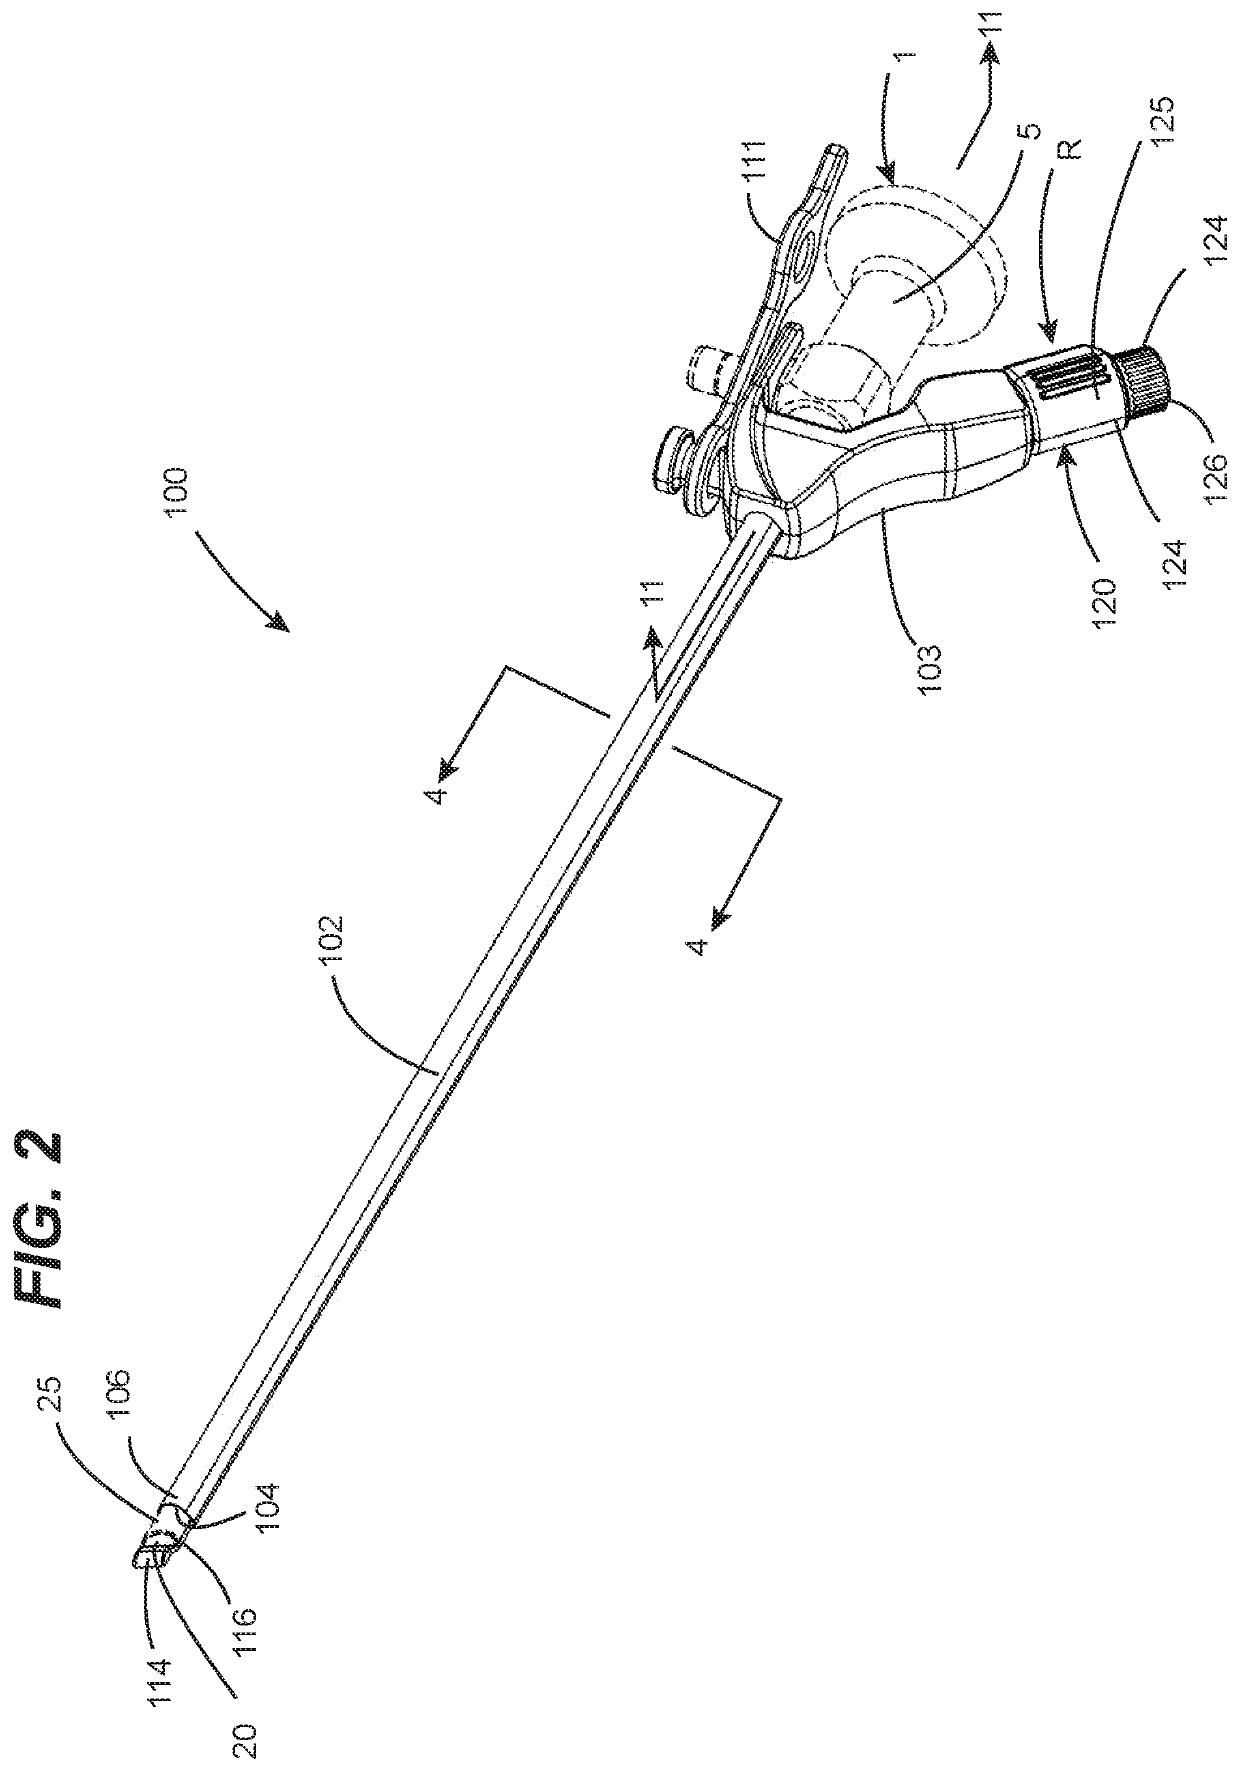 Imaging element cleaning apparatus with structure-mandated cleaning member motion control